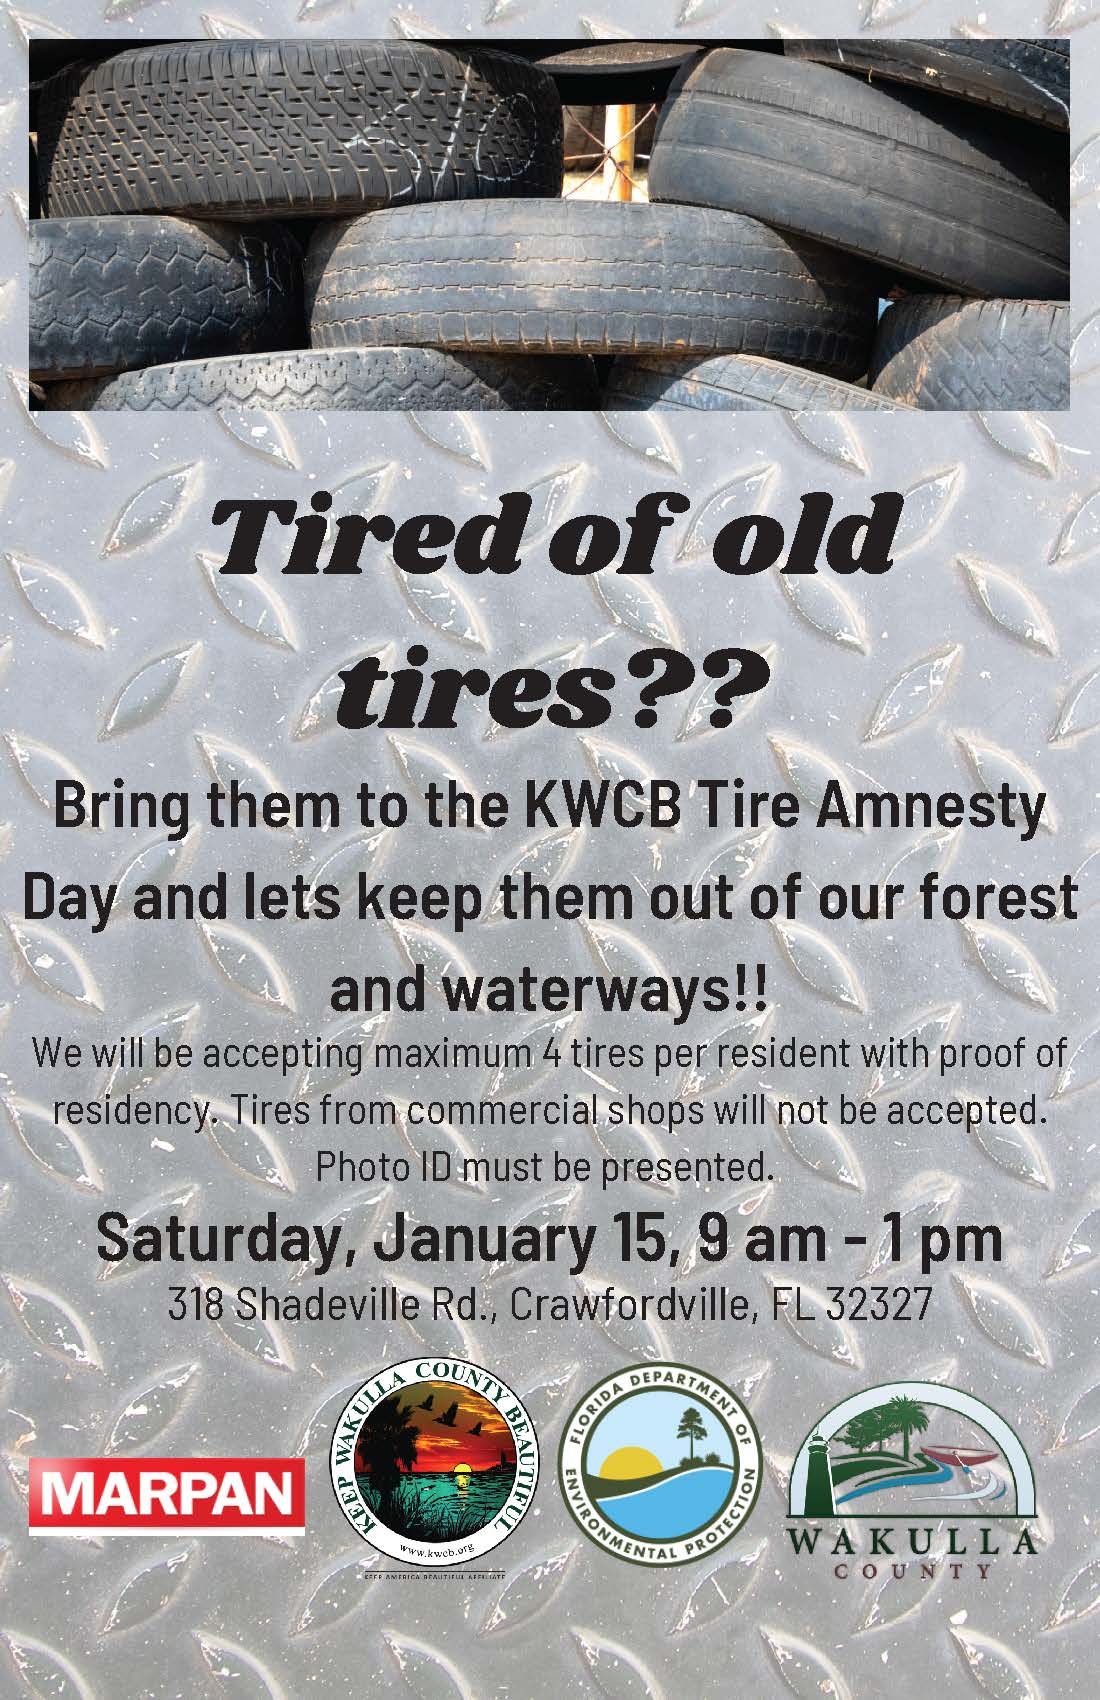 Tired of your old tires - 1/15/22 Tire Amnesty Day